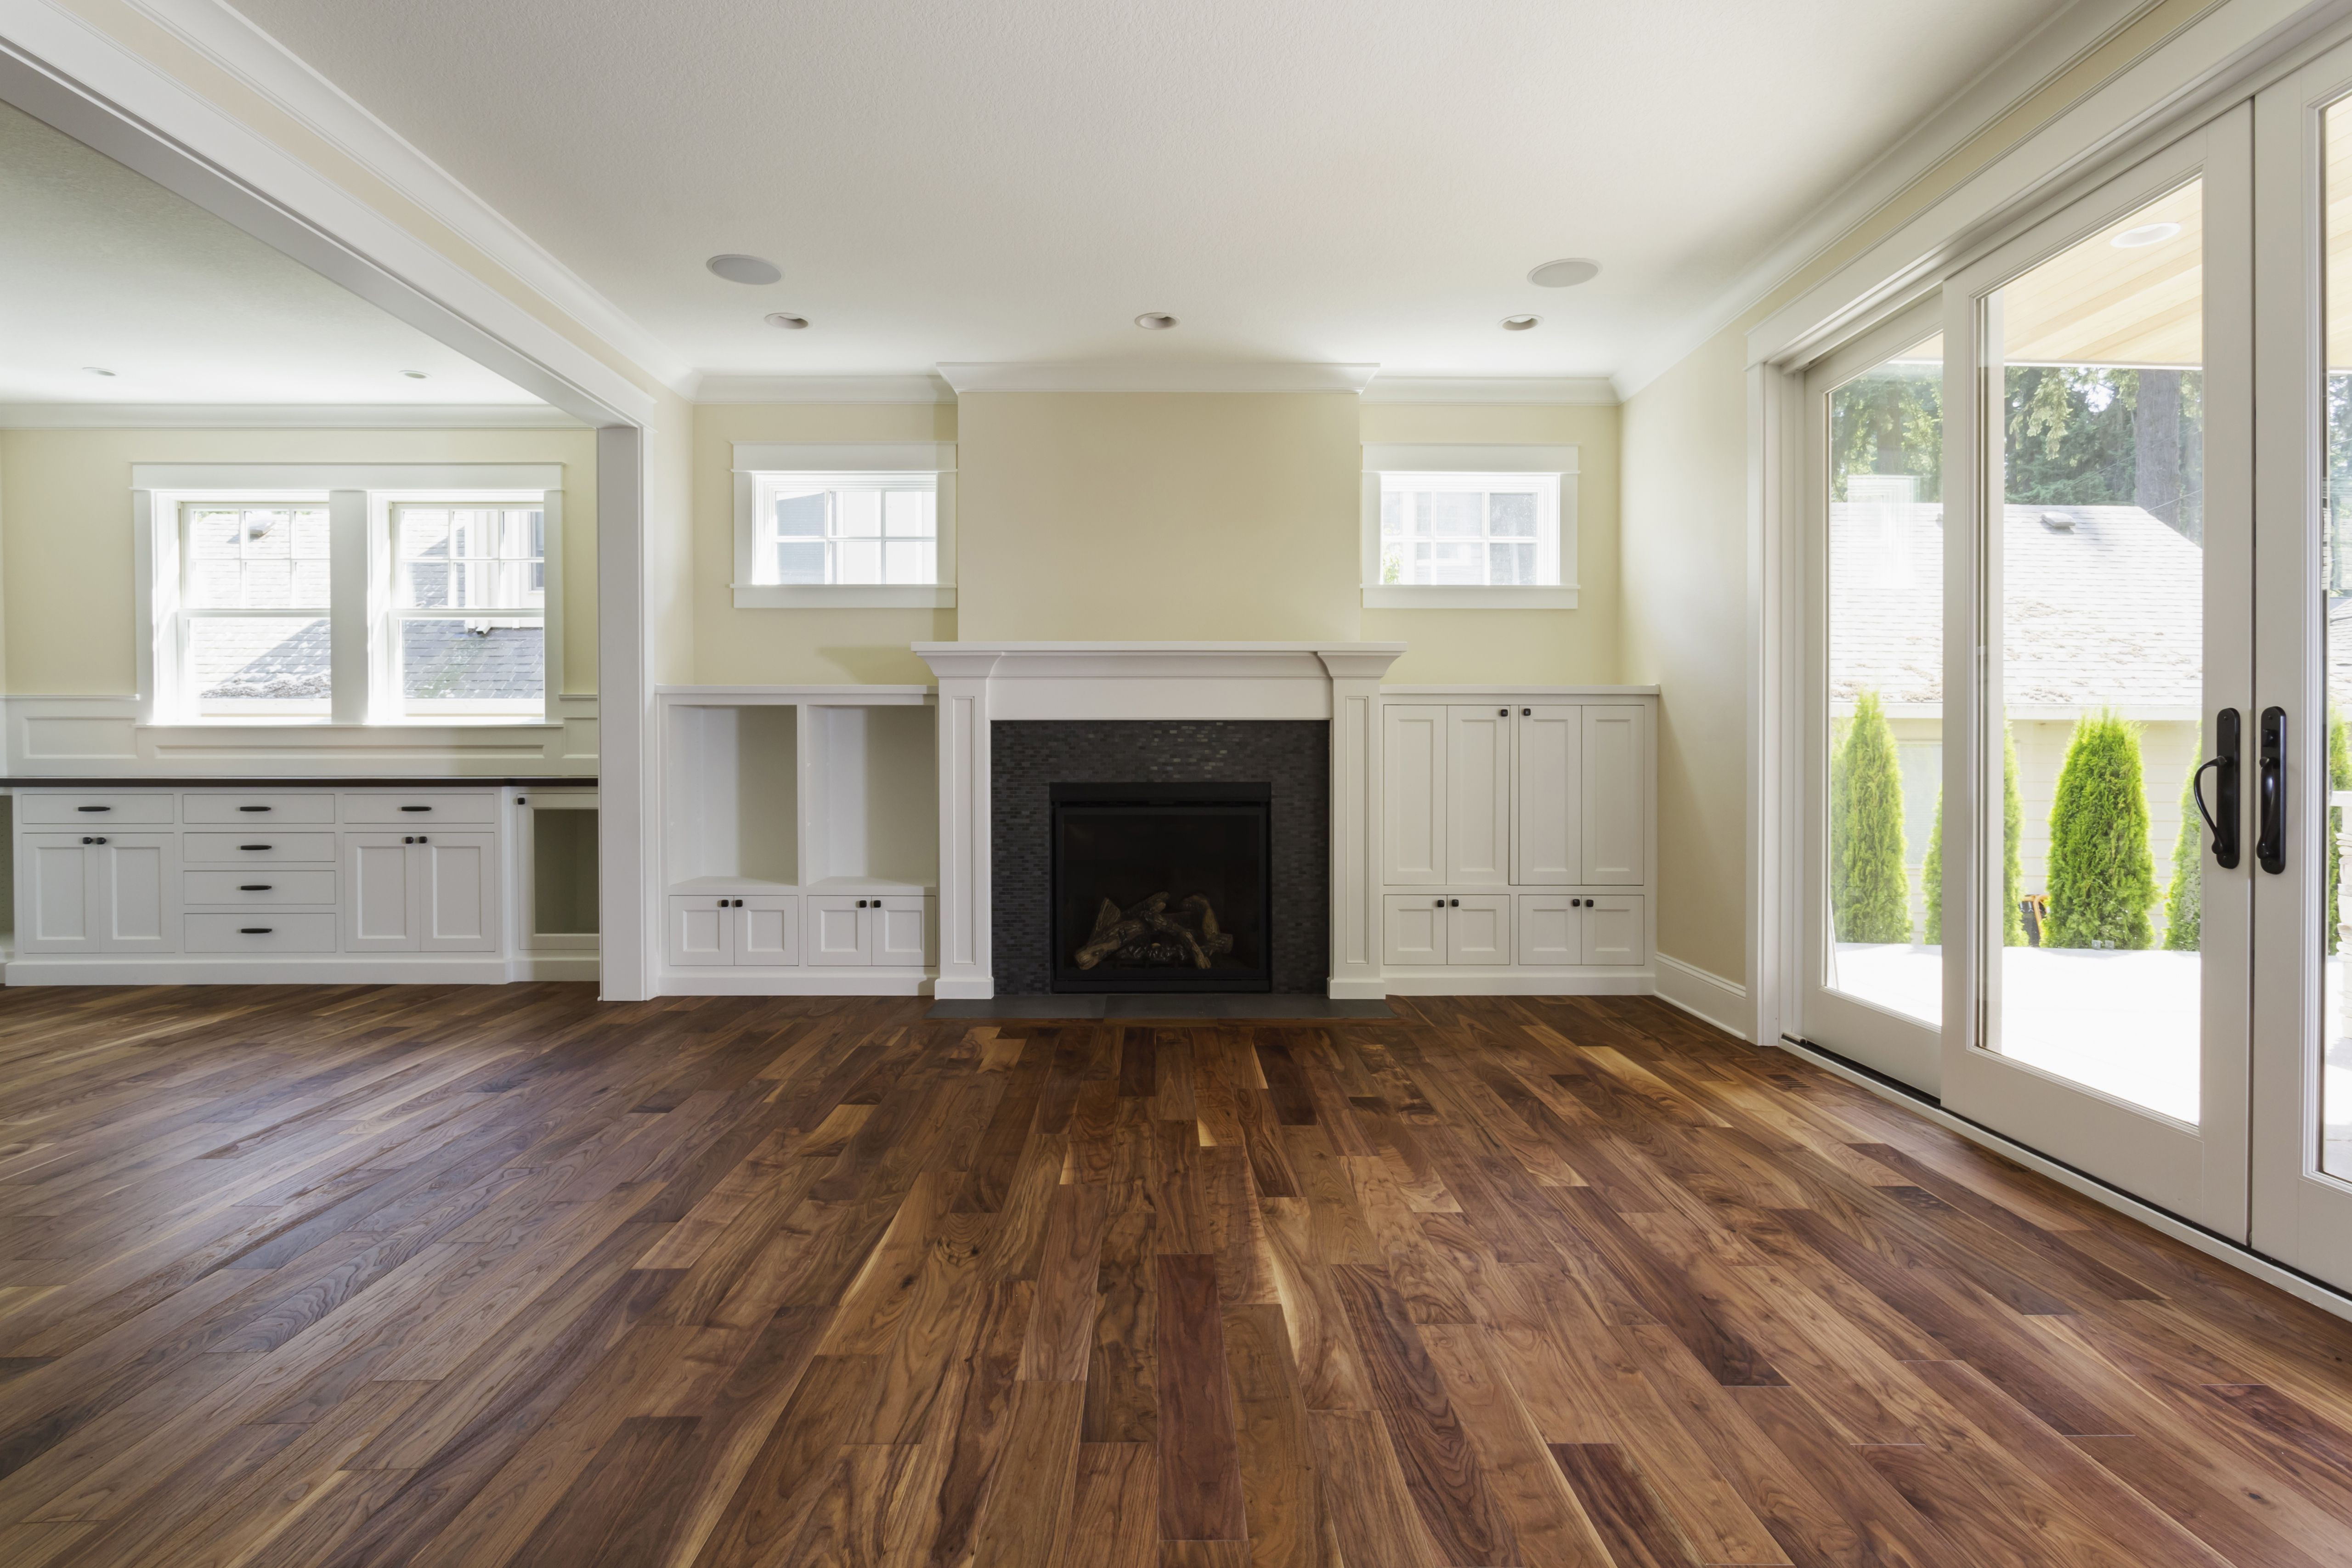 hardwood floors in kitchen good idea of the pros and cons of prefinished hardwood flooring for fireplace and built in shelves in living room 482143011 57bef8e33df78cc16e035397